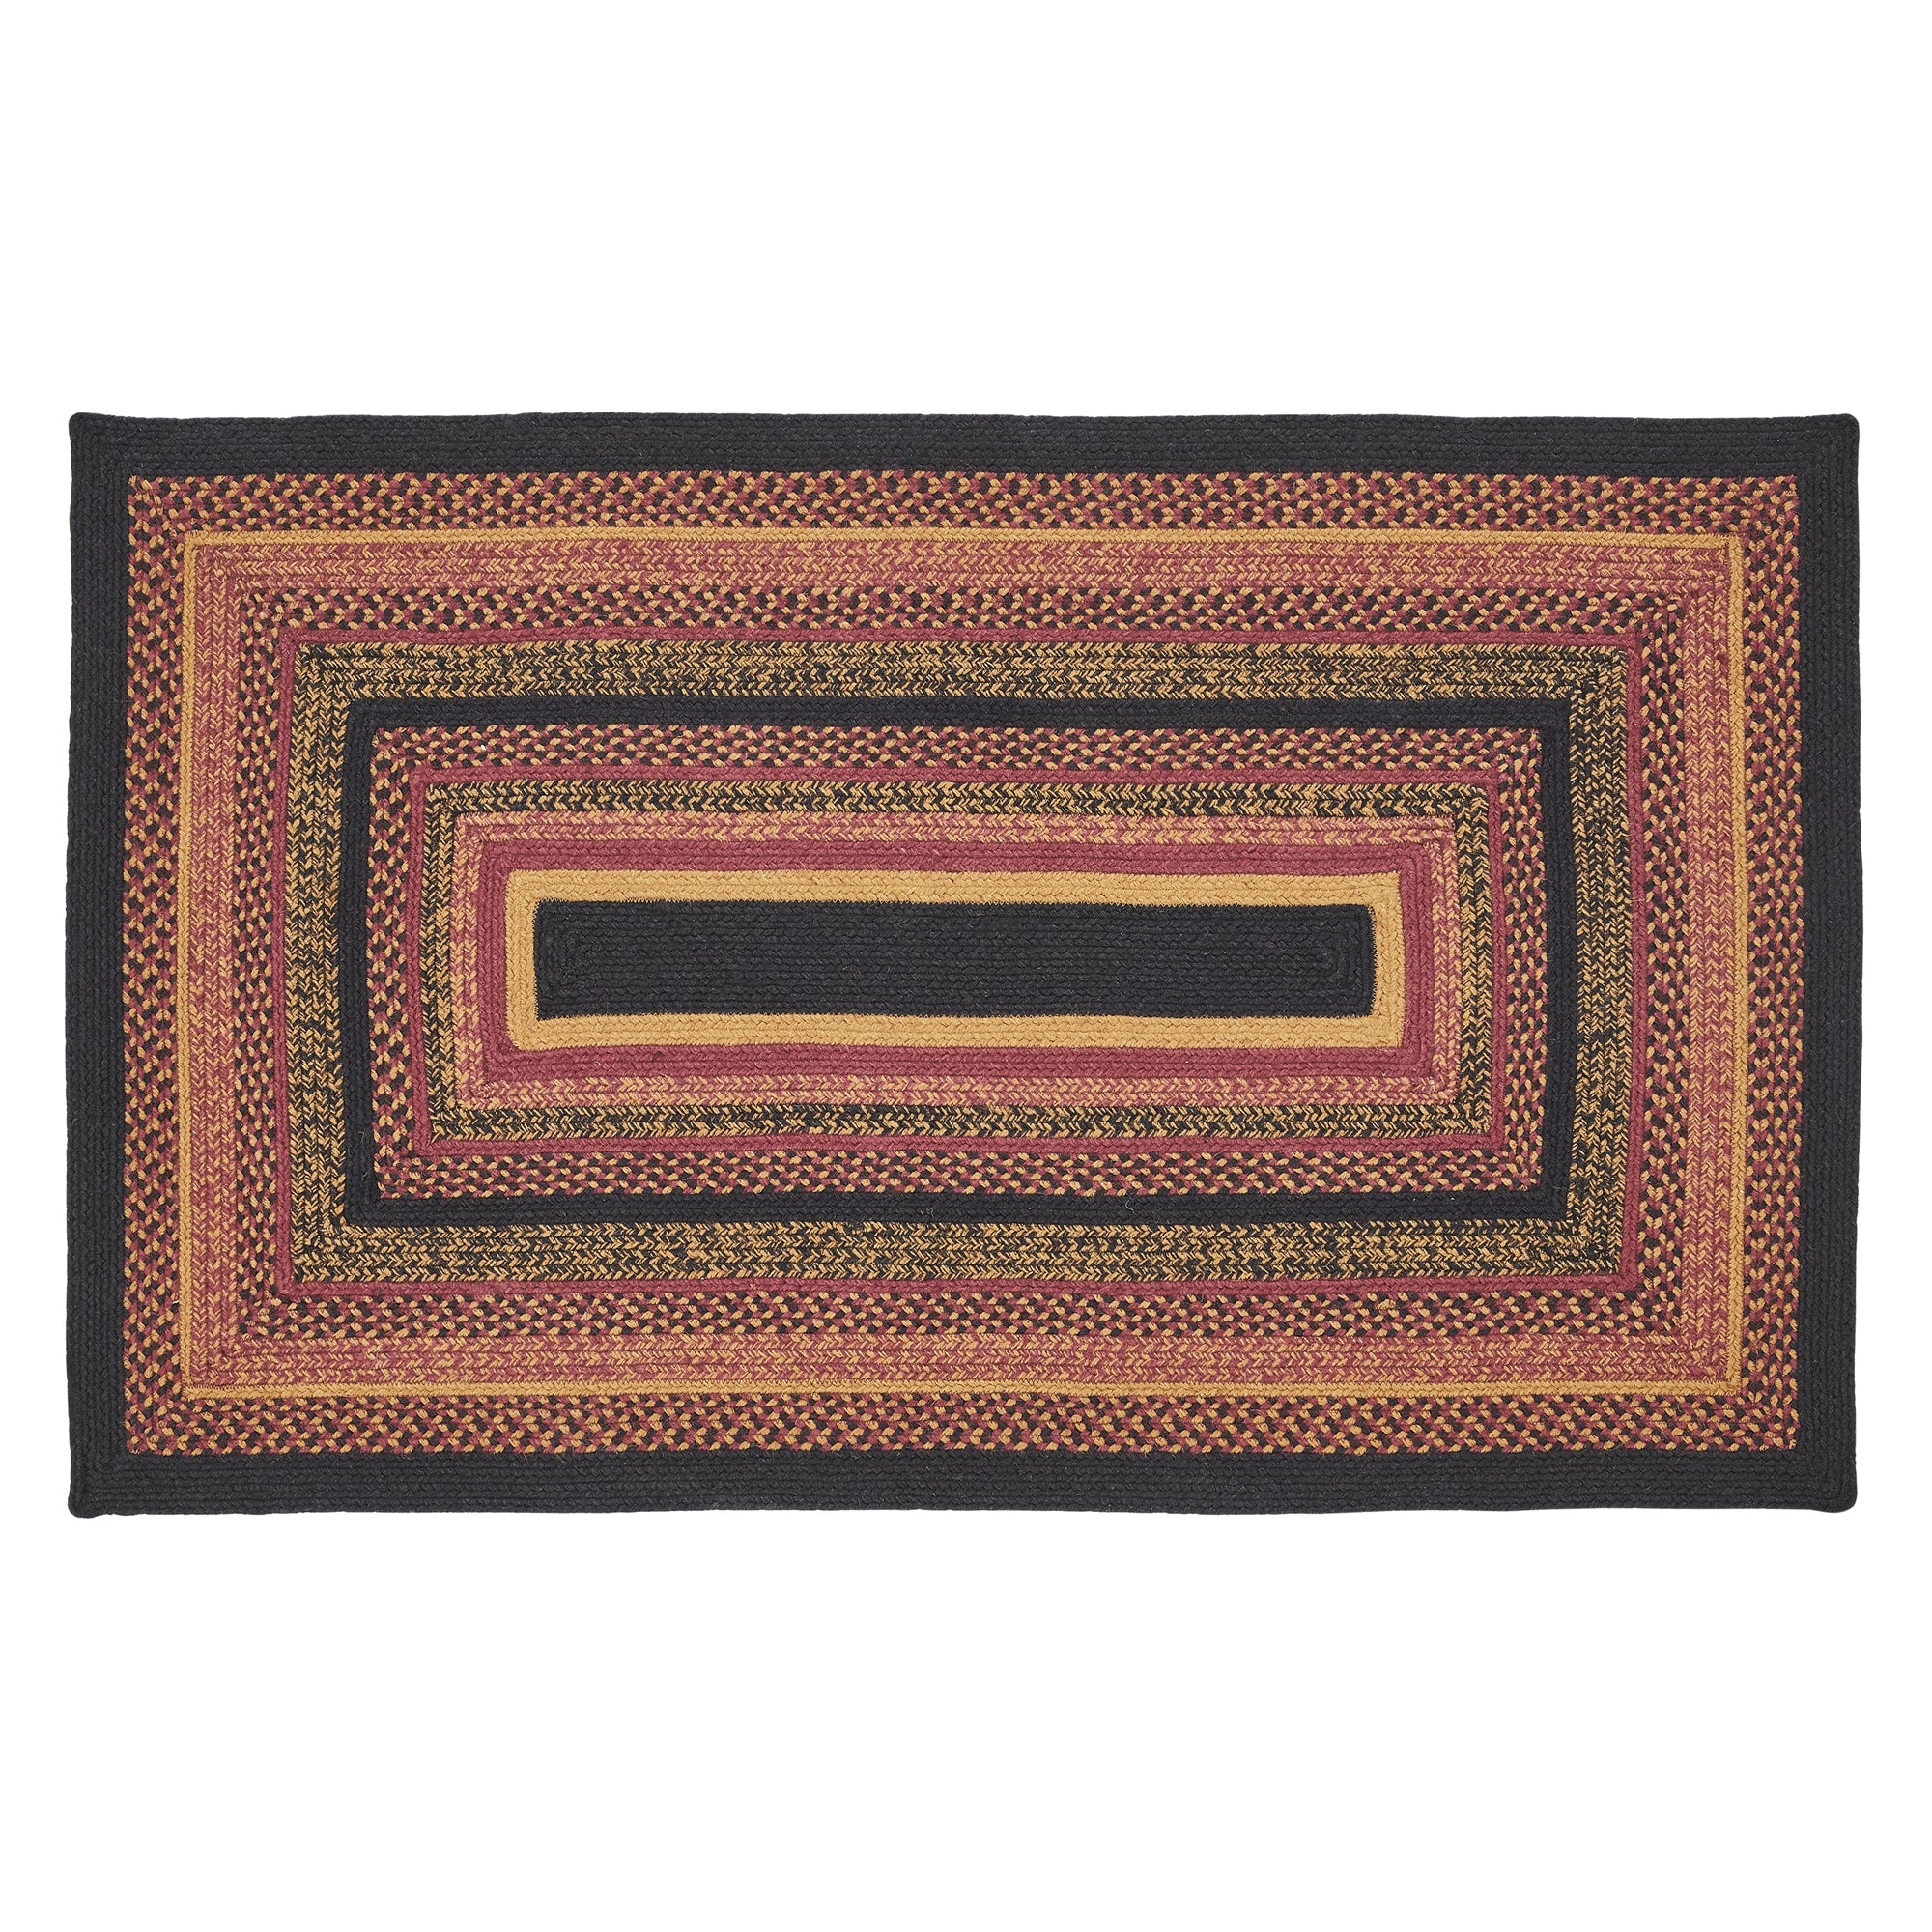 Heritage Farms Jute Braided Rug Rect. with Rug Pad 3'x5' VHC Brands